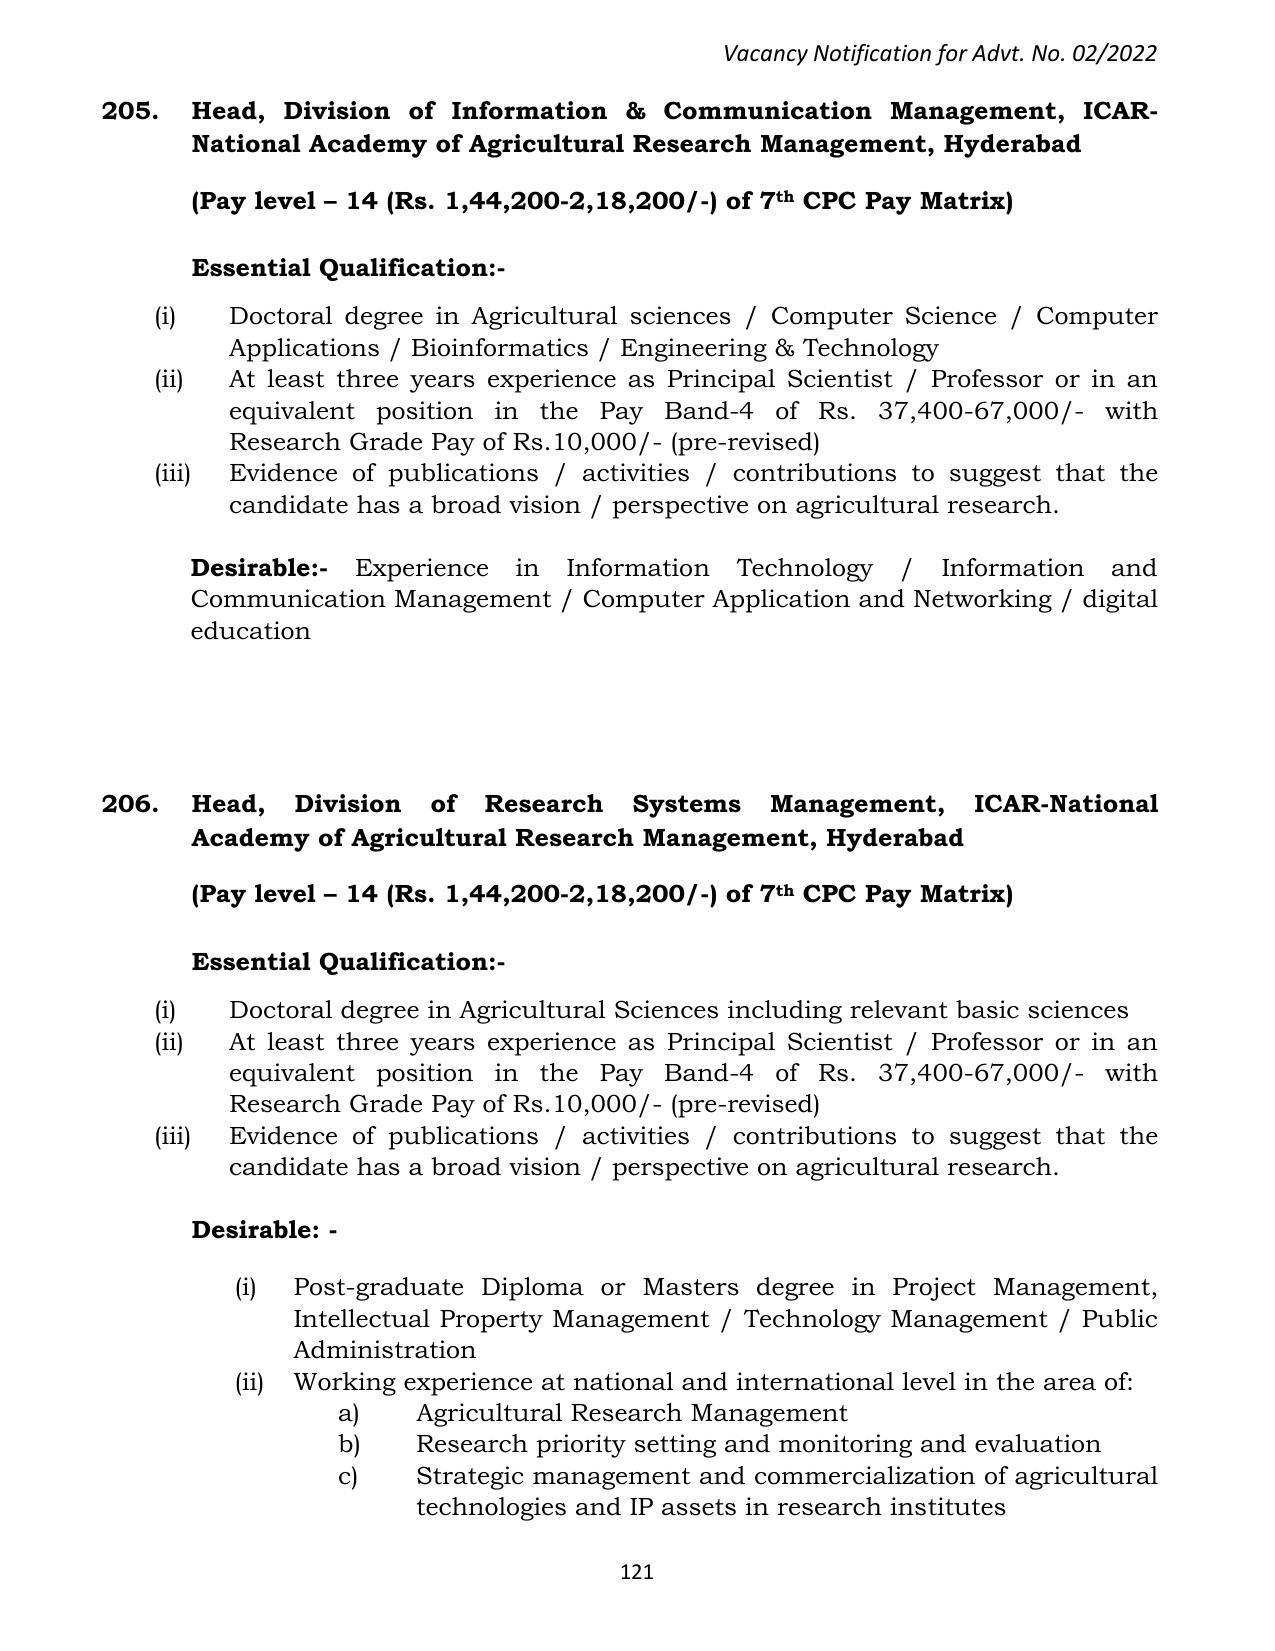 ASRB Non-Research Management Recruitment 2022 - Page 93